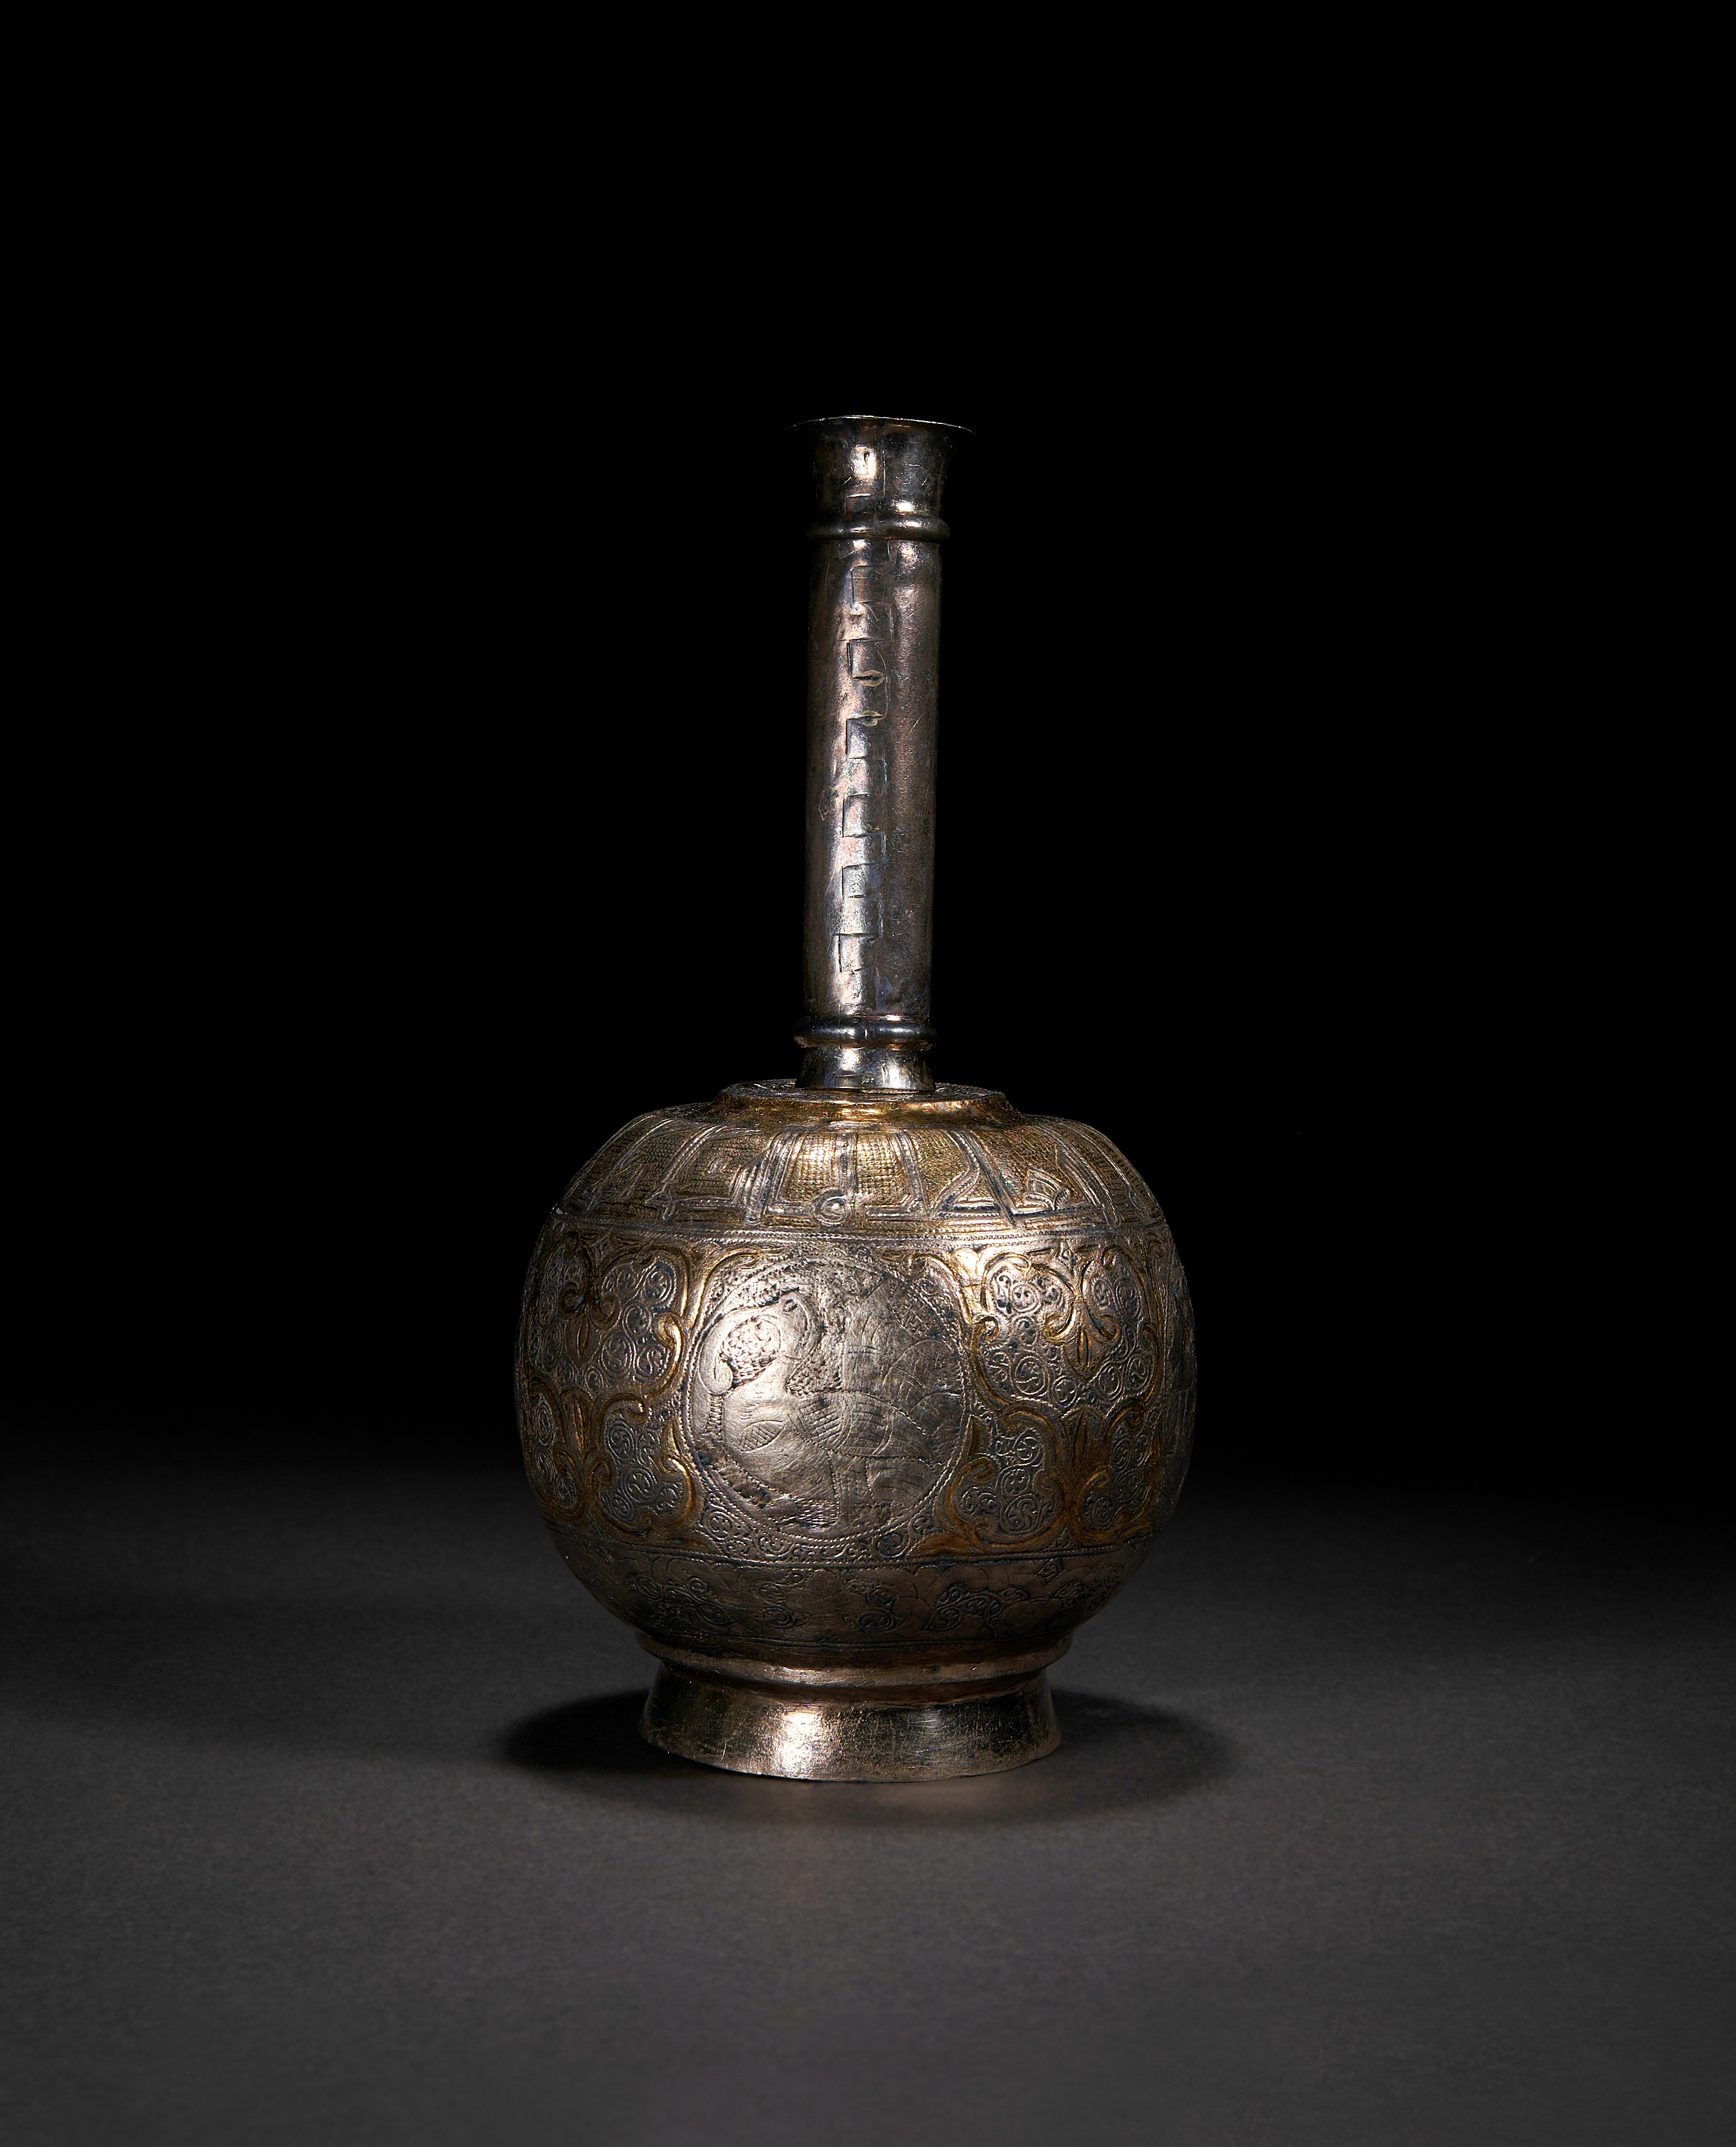 AN EARLY FATIMID KUFIC INSCRIBED PARCEL-GILT SILVER ROSEWATER SPRINKLER, EGYPT, 9TH CENTURY - Image 2 of 2